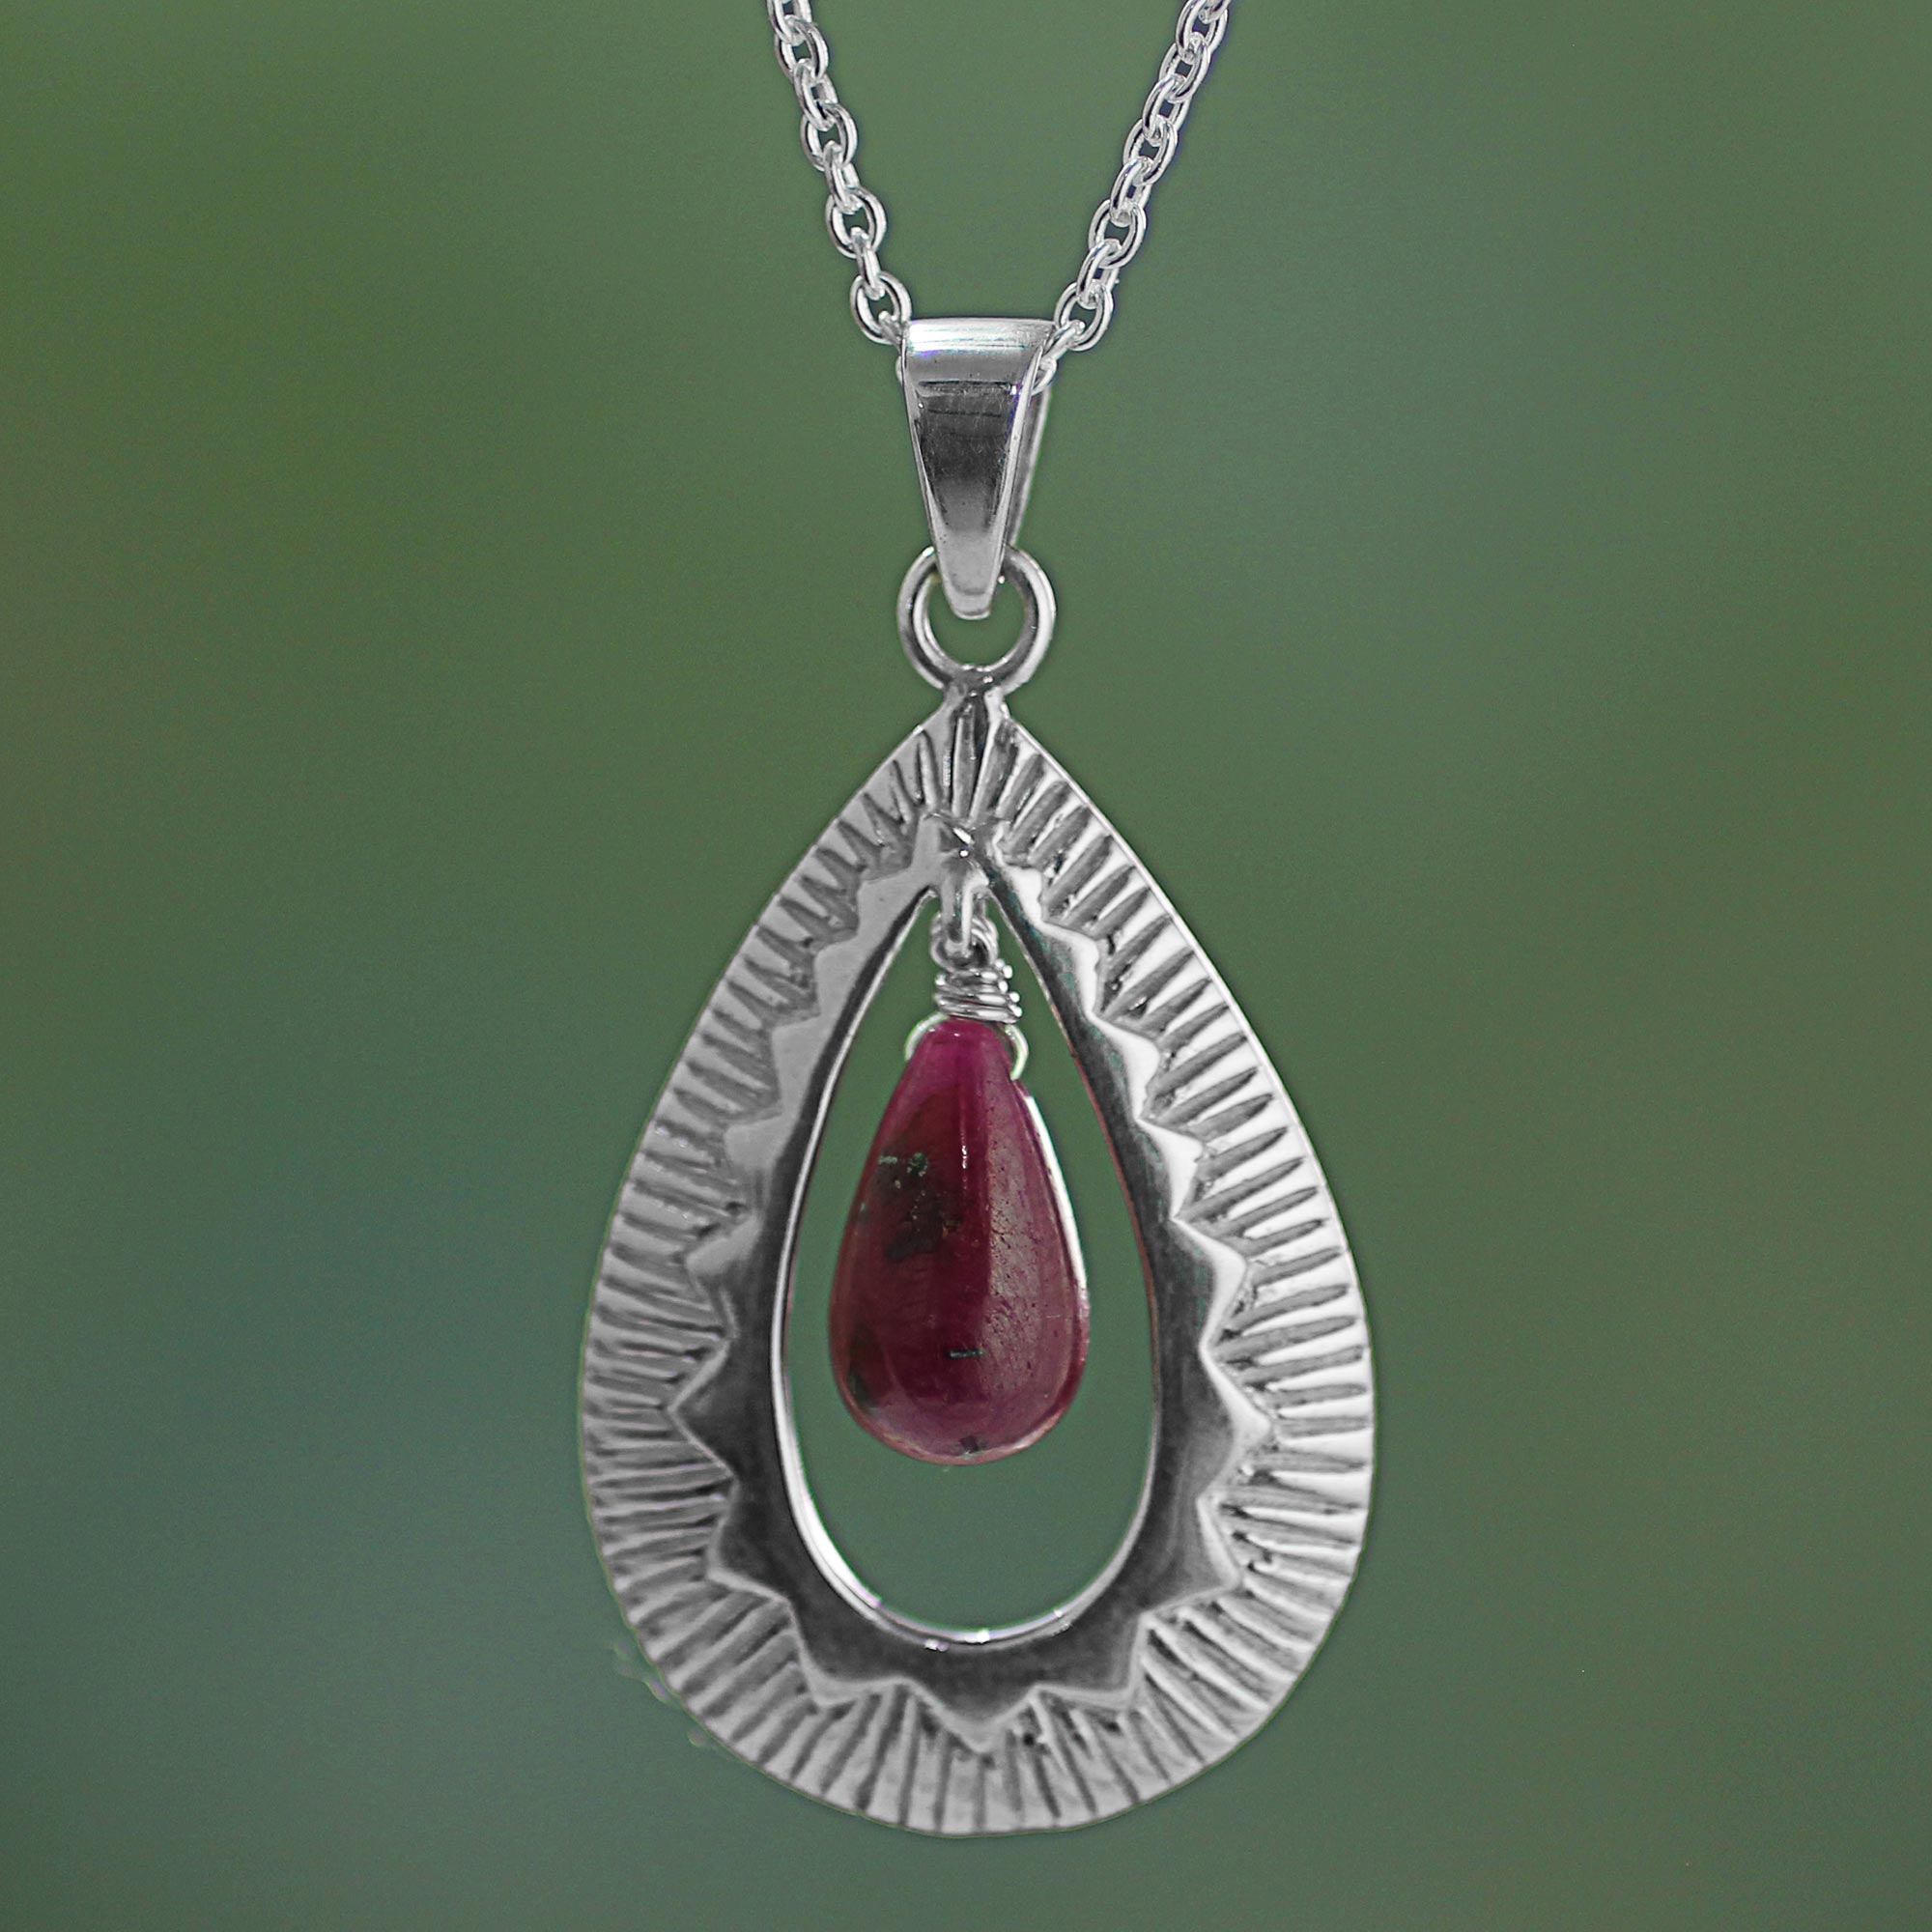 Handcrafted Sterling Silver Ruby Pendant Chain Necklace from India, 'Ruby Grandeur' NOVICA Fair tradeGemstone Complement to Skin Tone 